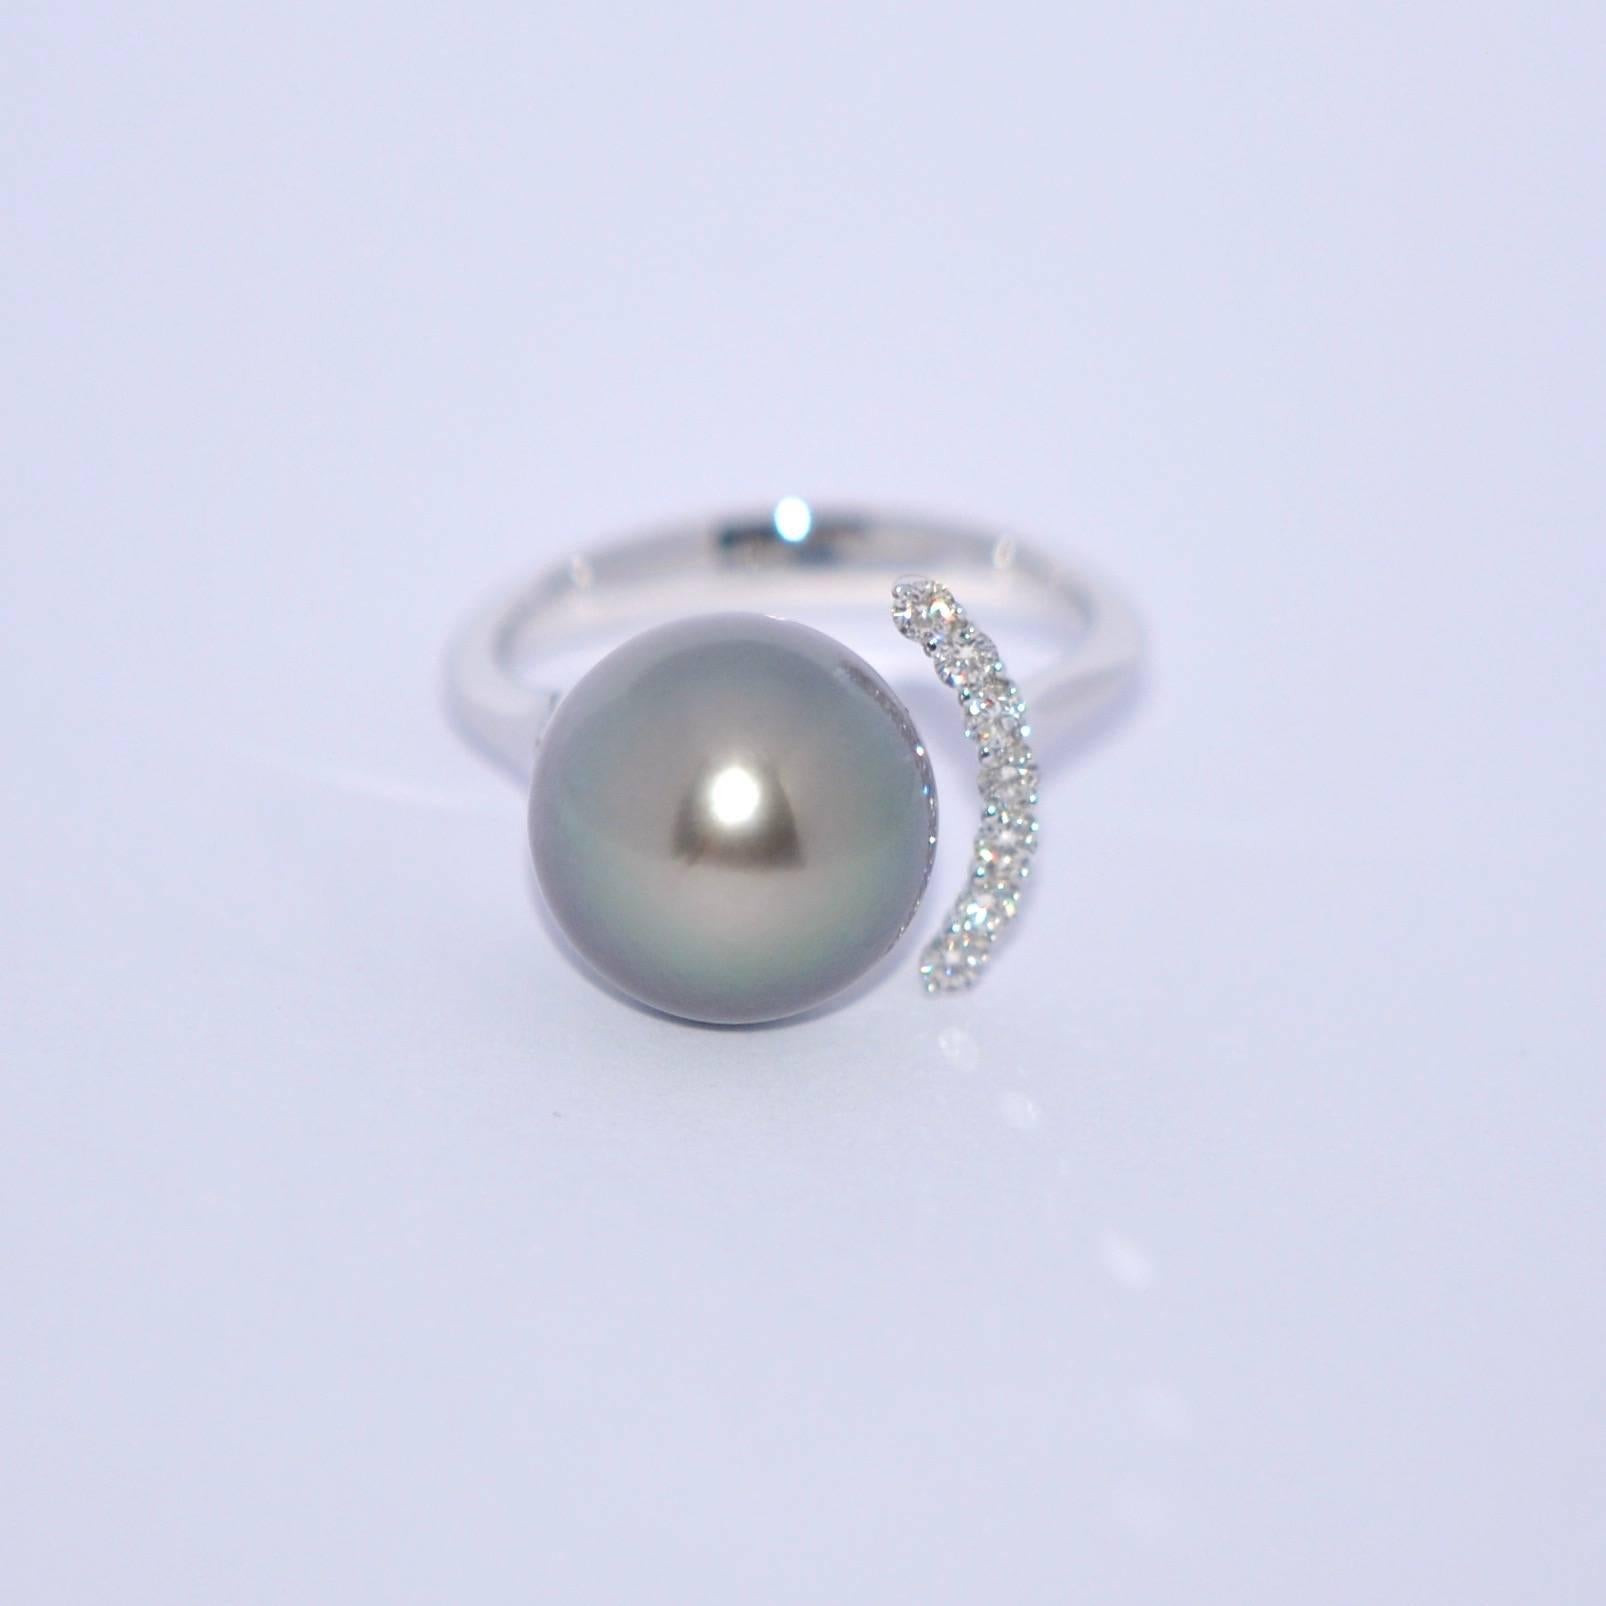 Discover this Black South Sea Pearl 11-12 mm Diamonds G/VS ct 0.23 on White Gold 18K Ring.
South Sea pearls require no artificial treatments or colouring before being put onto the market. By virtue of such prestige and beauty they are considered